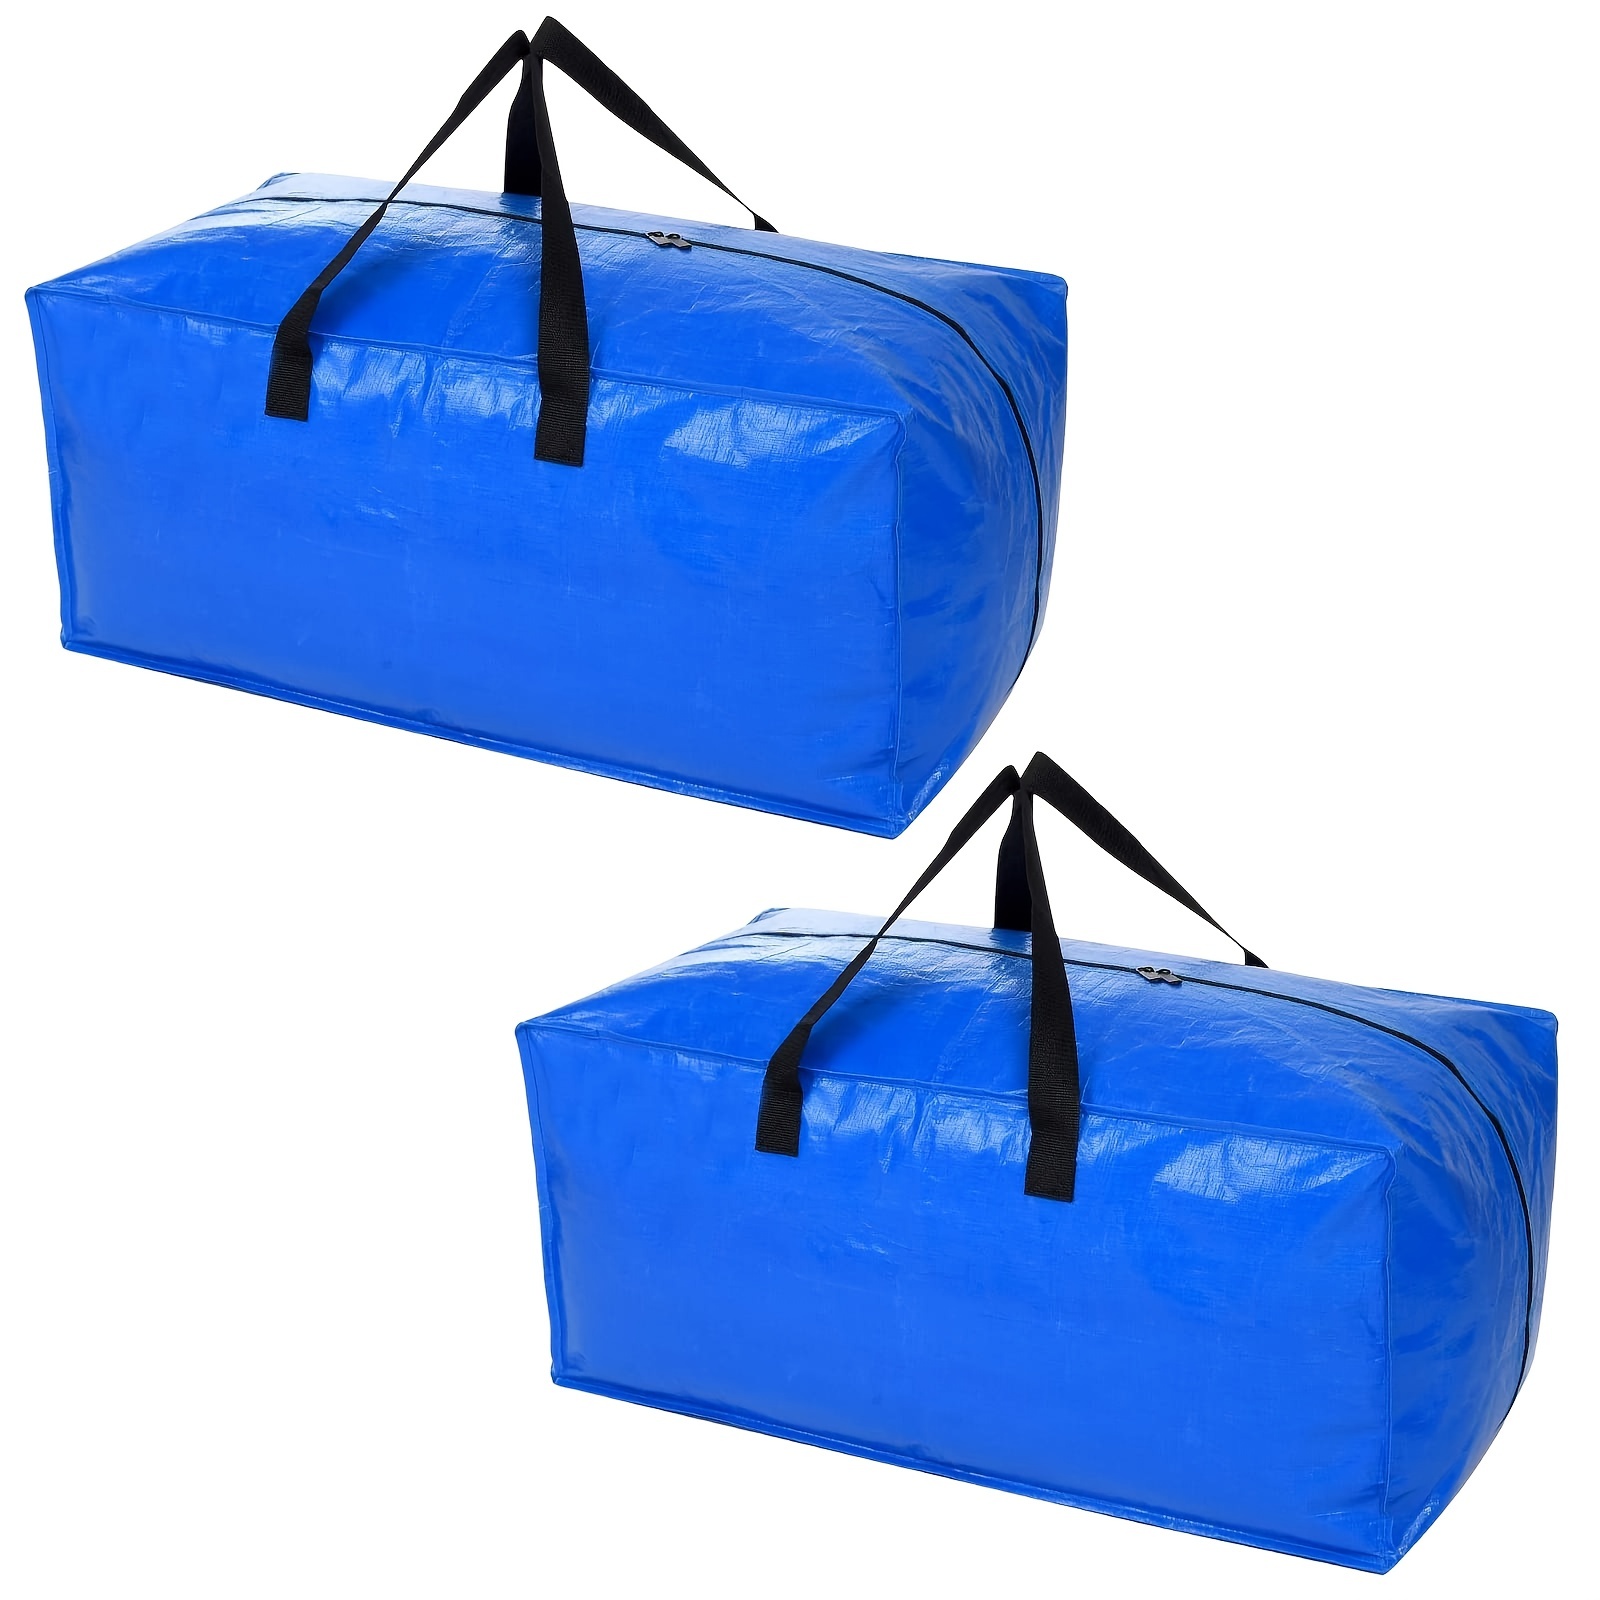  Moving Bags Heavy Duty,Extra Large Packing Bags for  Moving,Reusable Plastic Moving Totes,Moving Storage Bags for Clothes,Moving  Supplies Bins,Compatible with Ikea Frakta Cart (Blue,Set of 4) : Home &  Kitchen